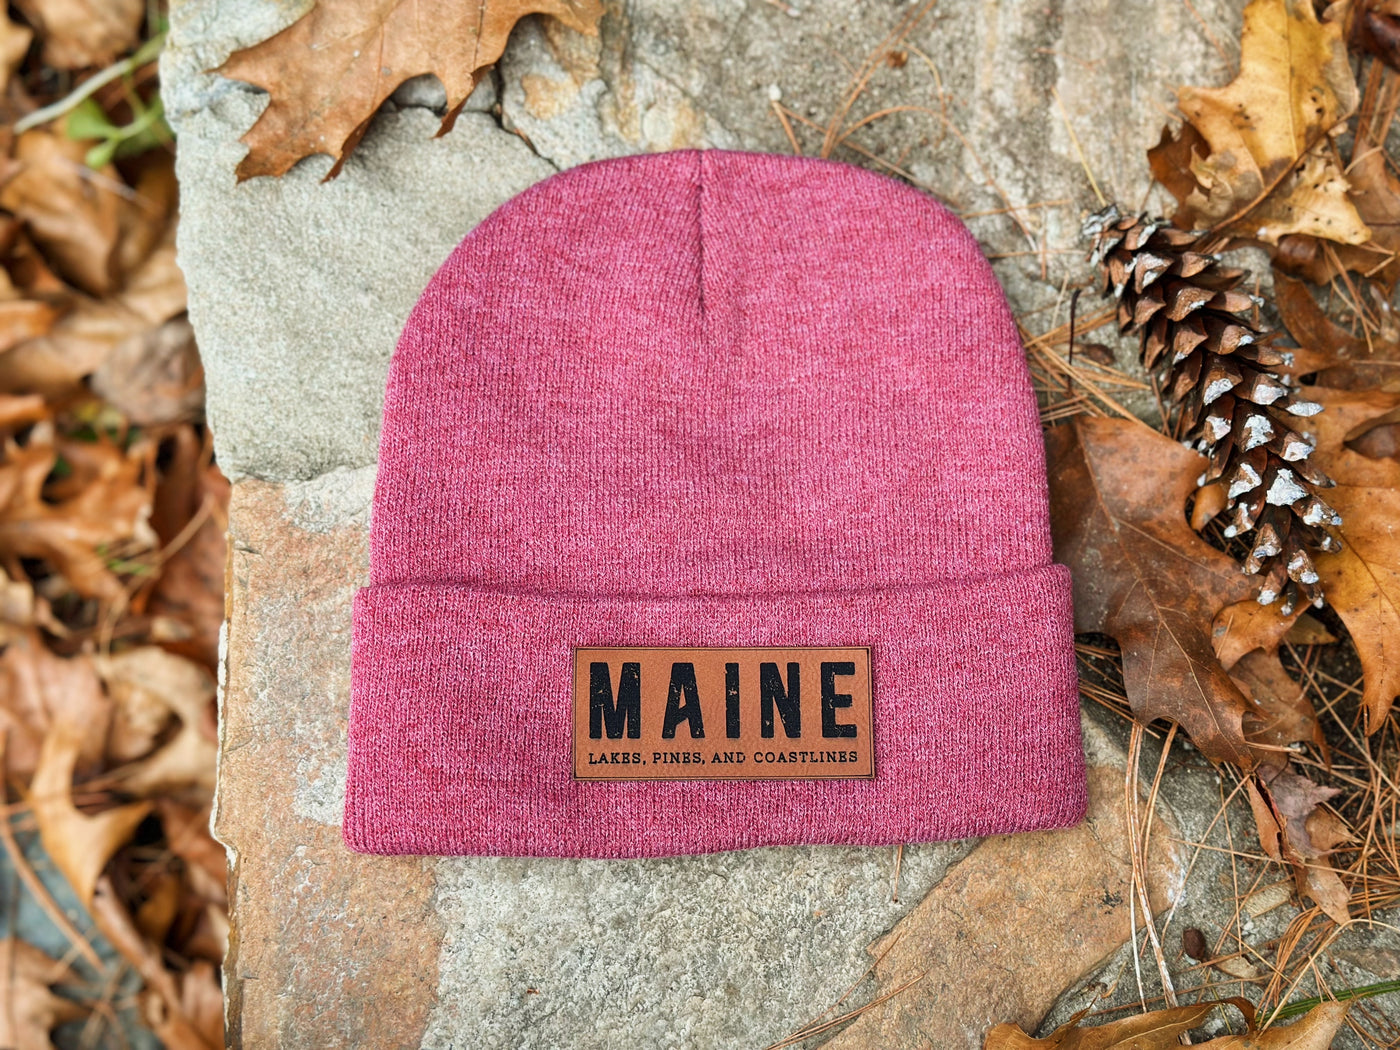 Engraved Patch Beanies